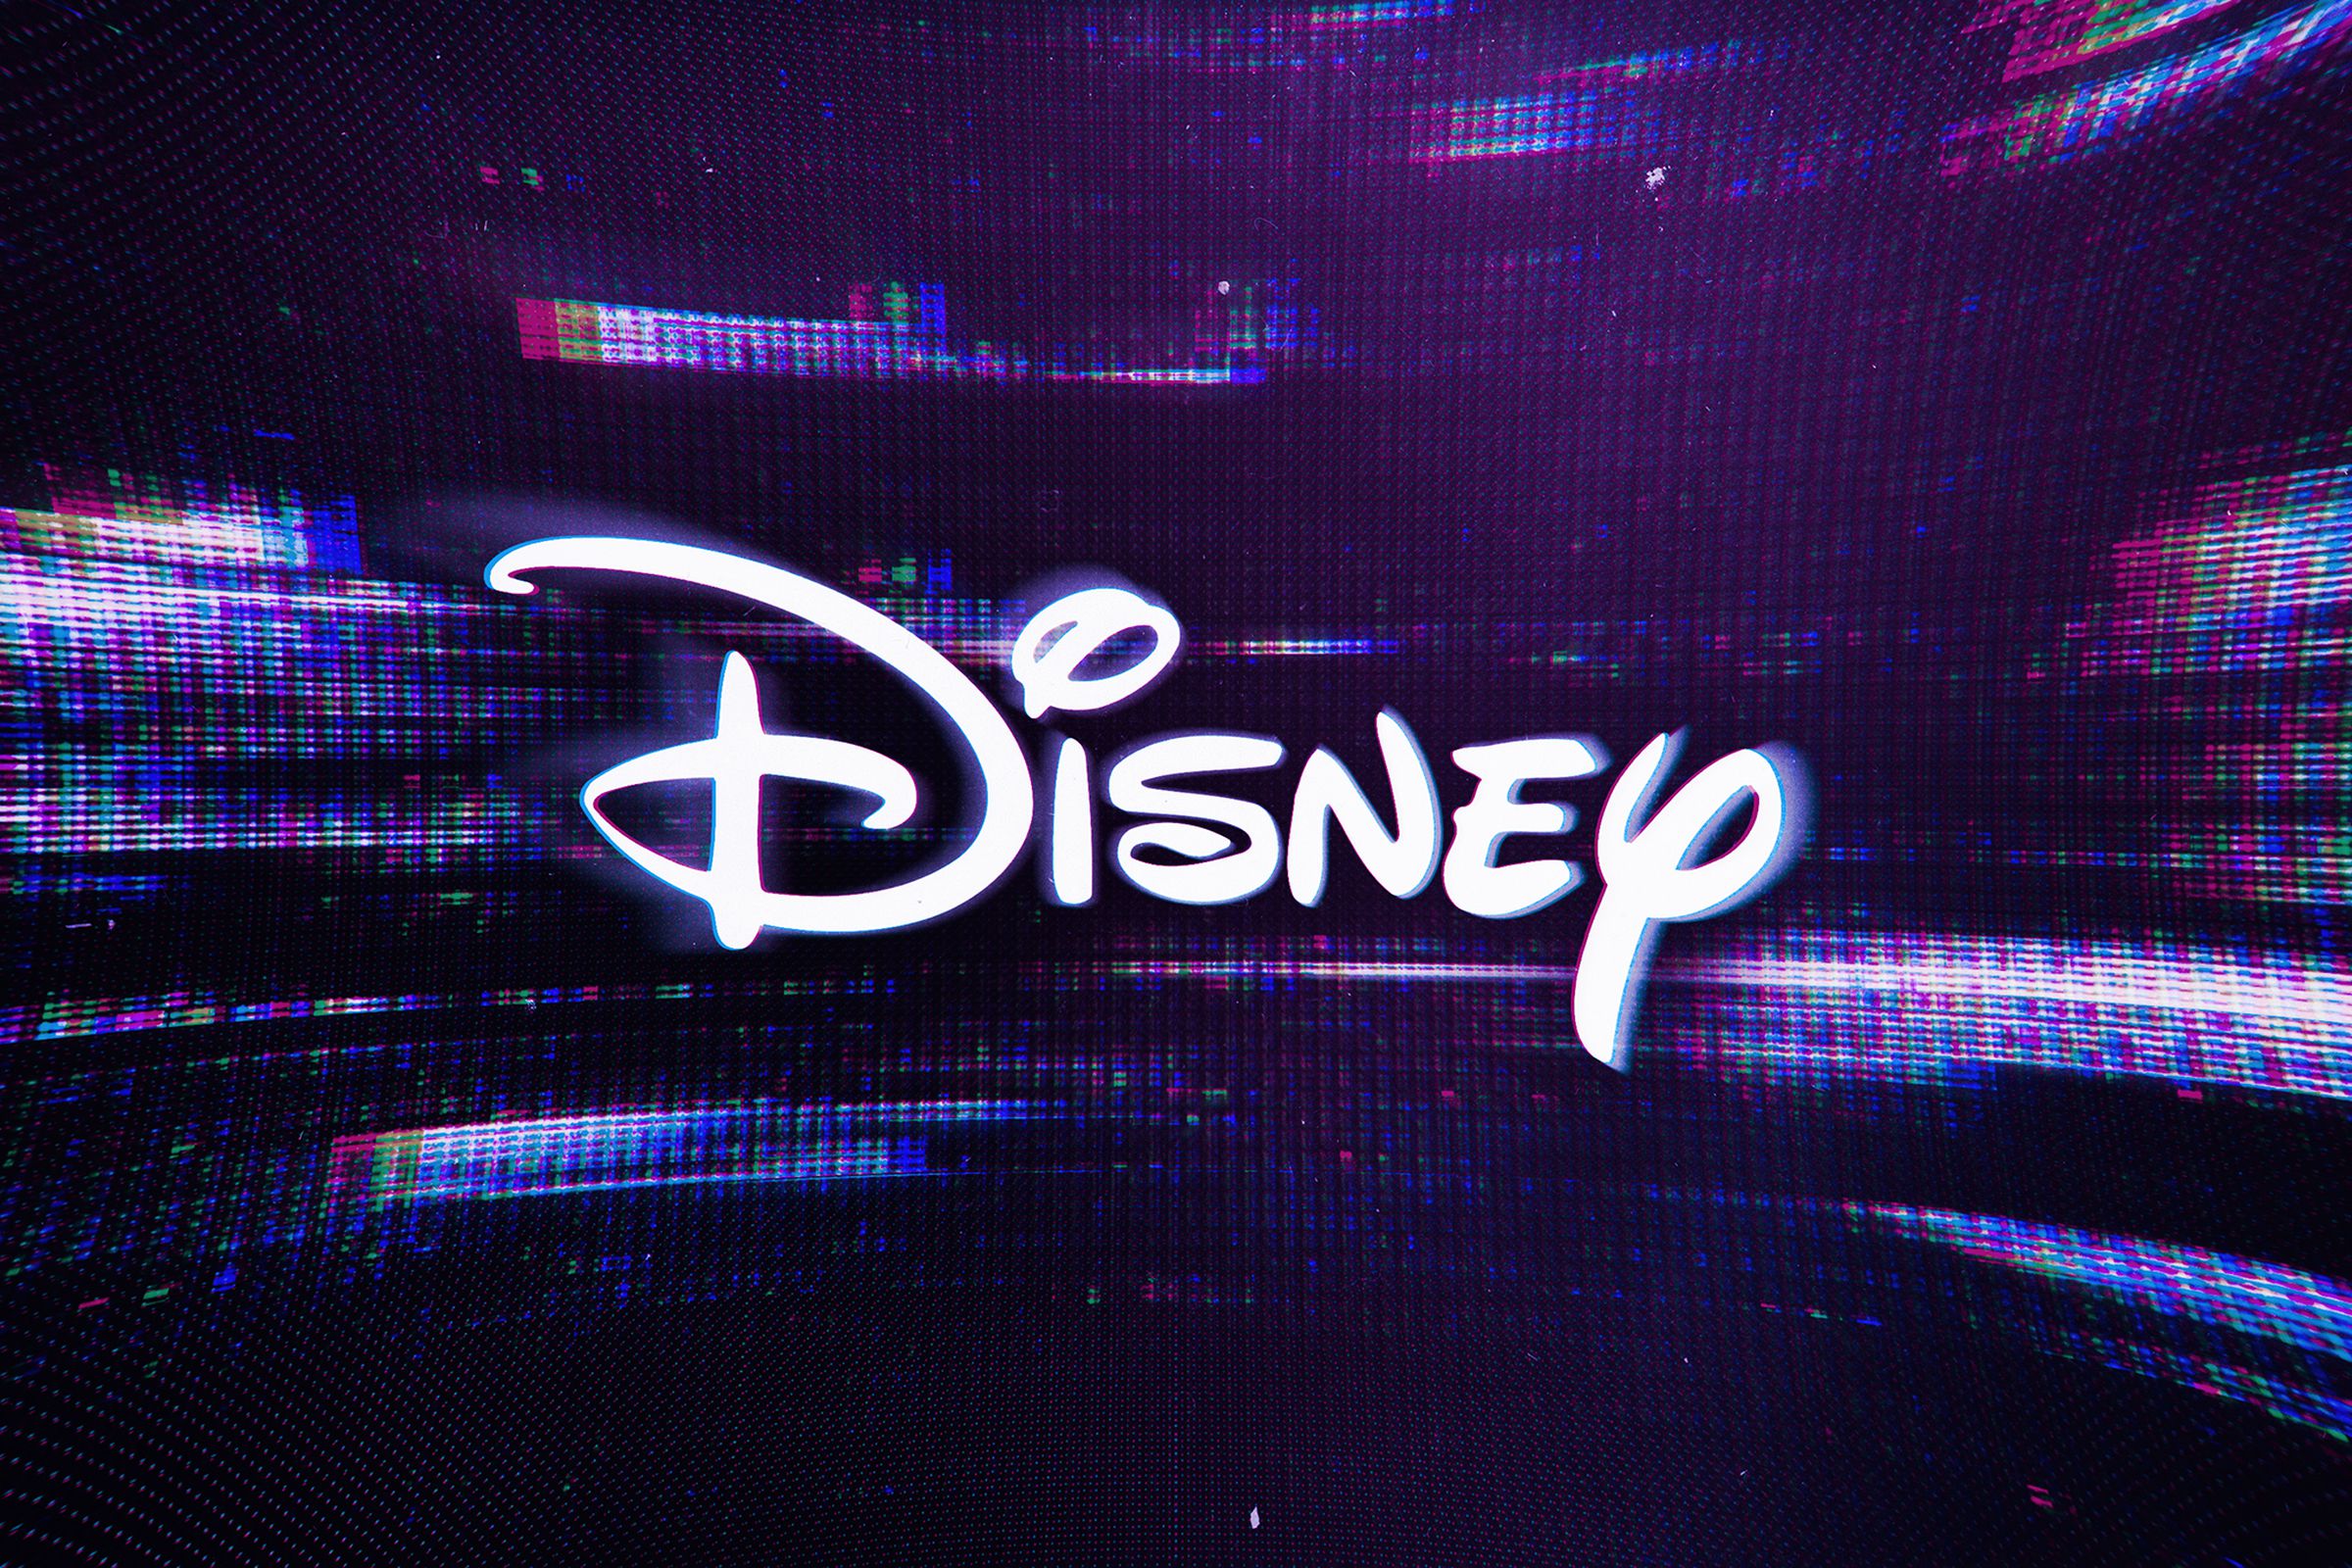 The Disney name written in white on a mostly purple background.